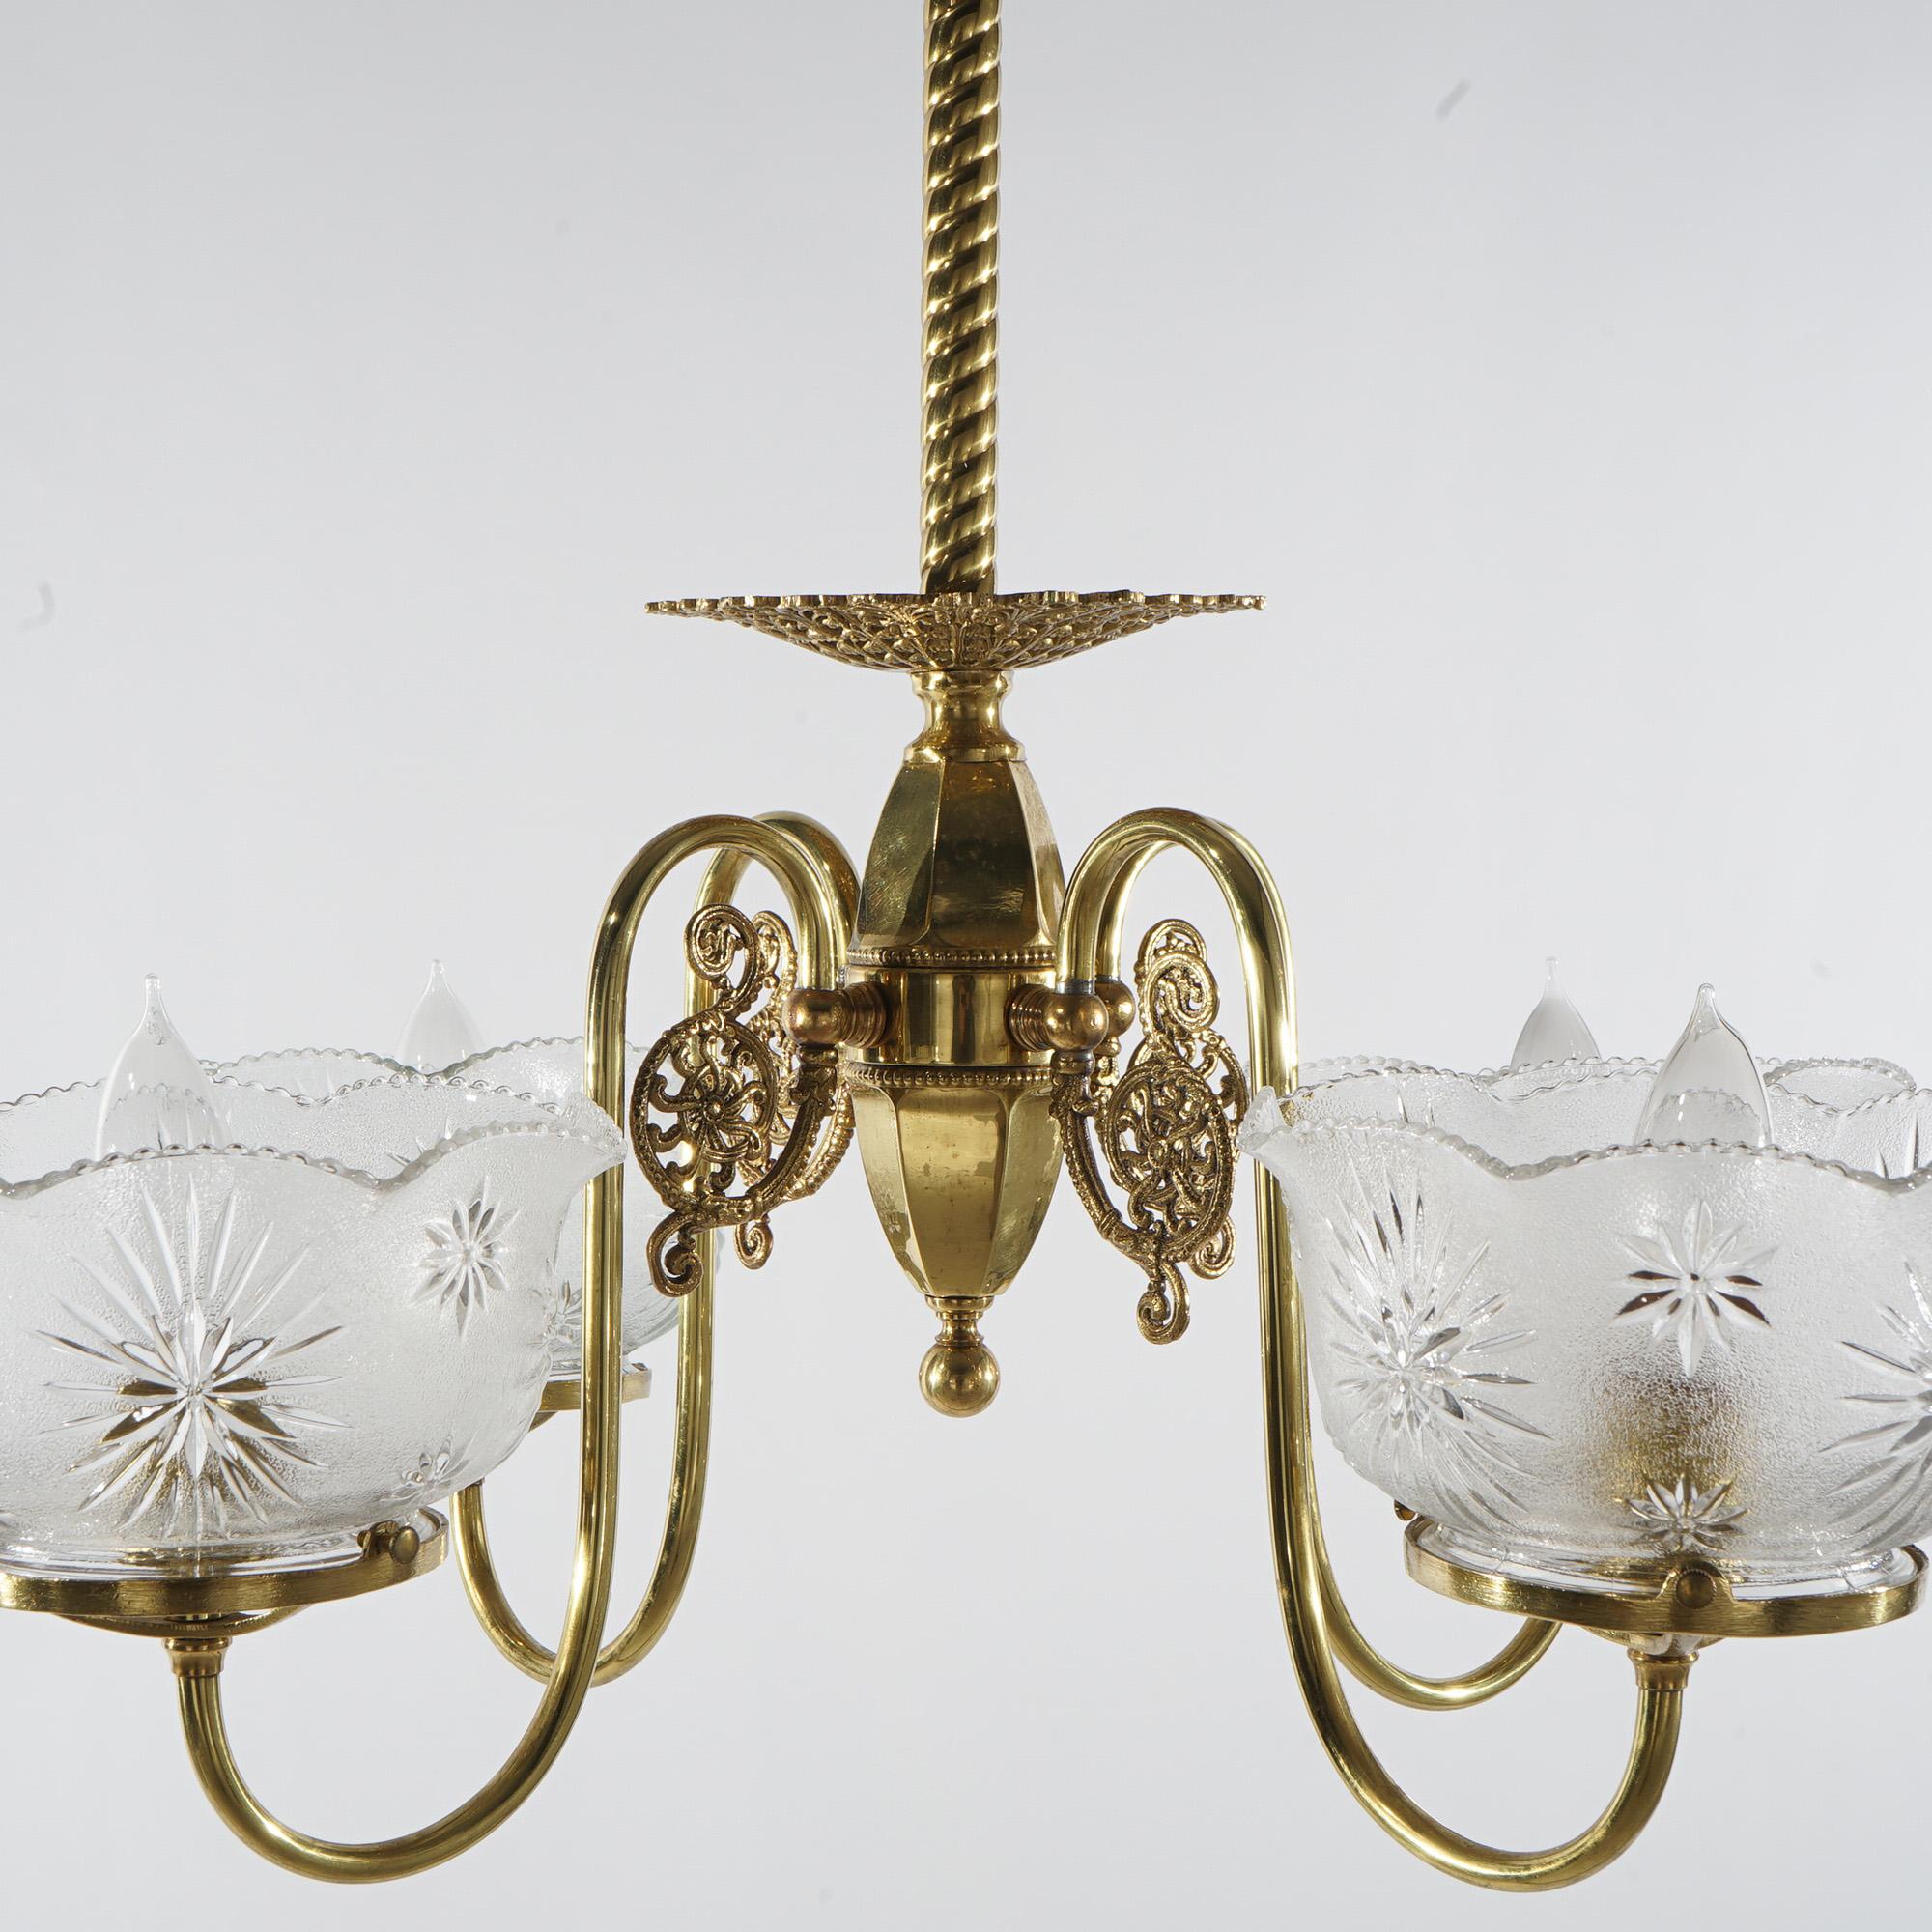 Antique Brass Four-Arm Gas Light Hanging Fixture with Glass Shades C1880 For Sale 1